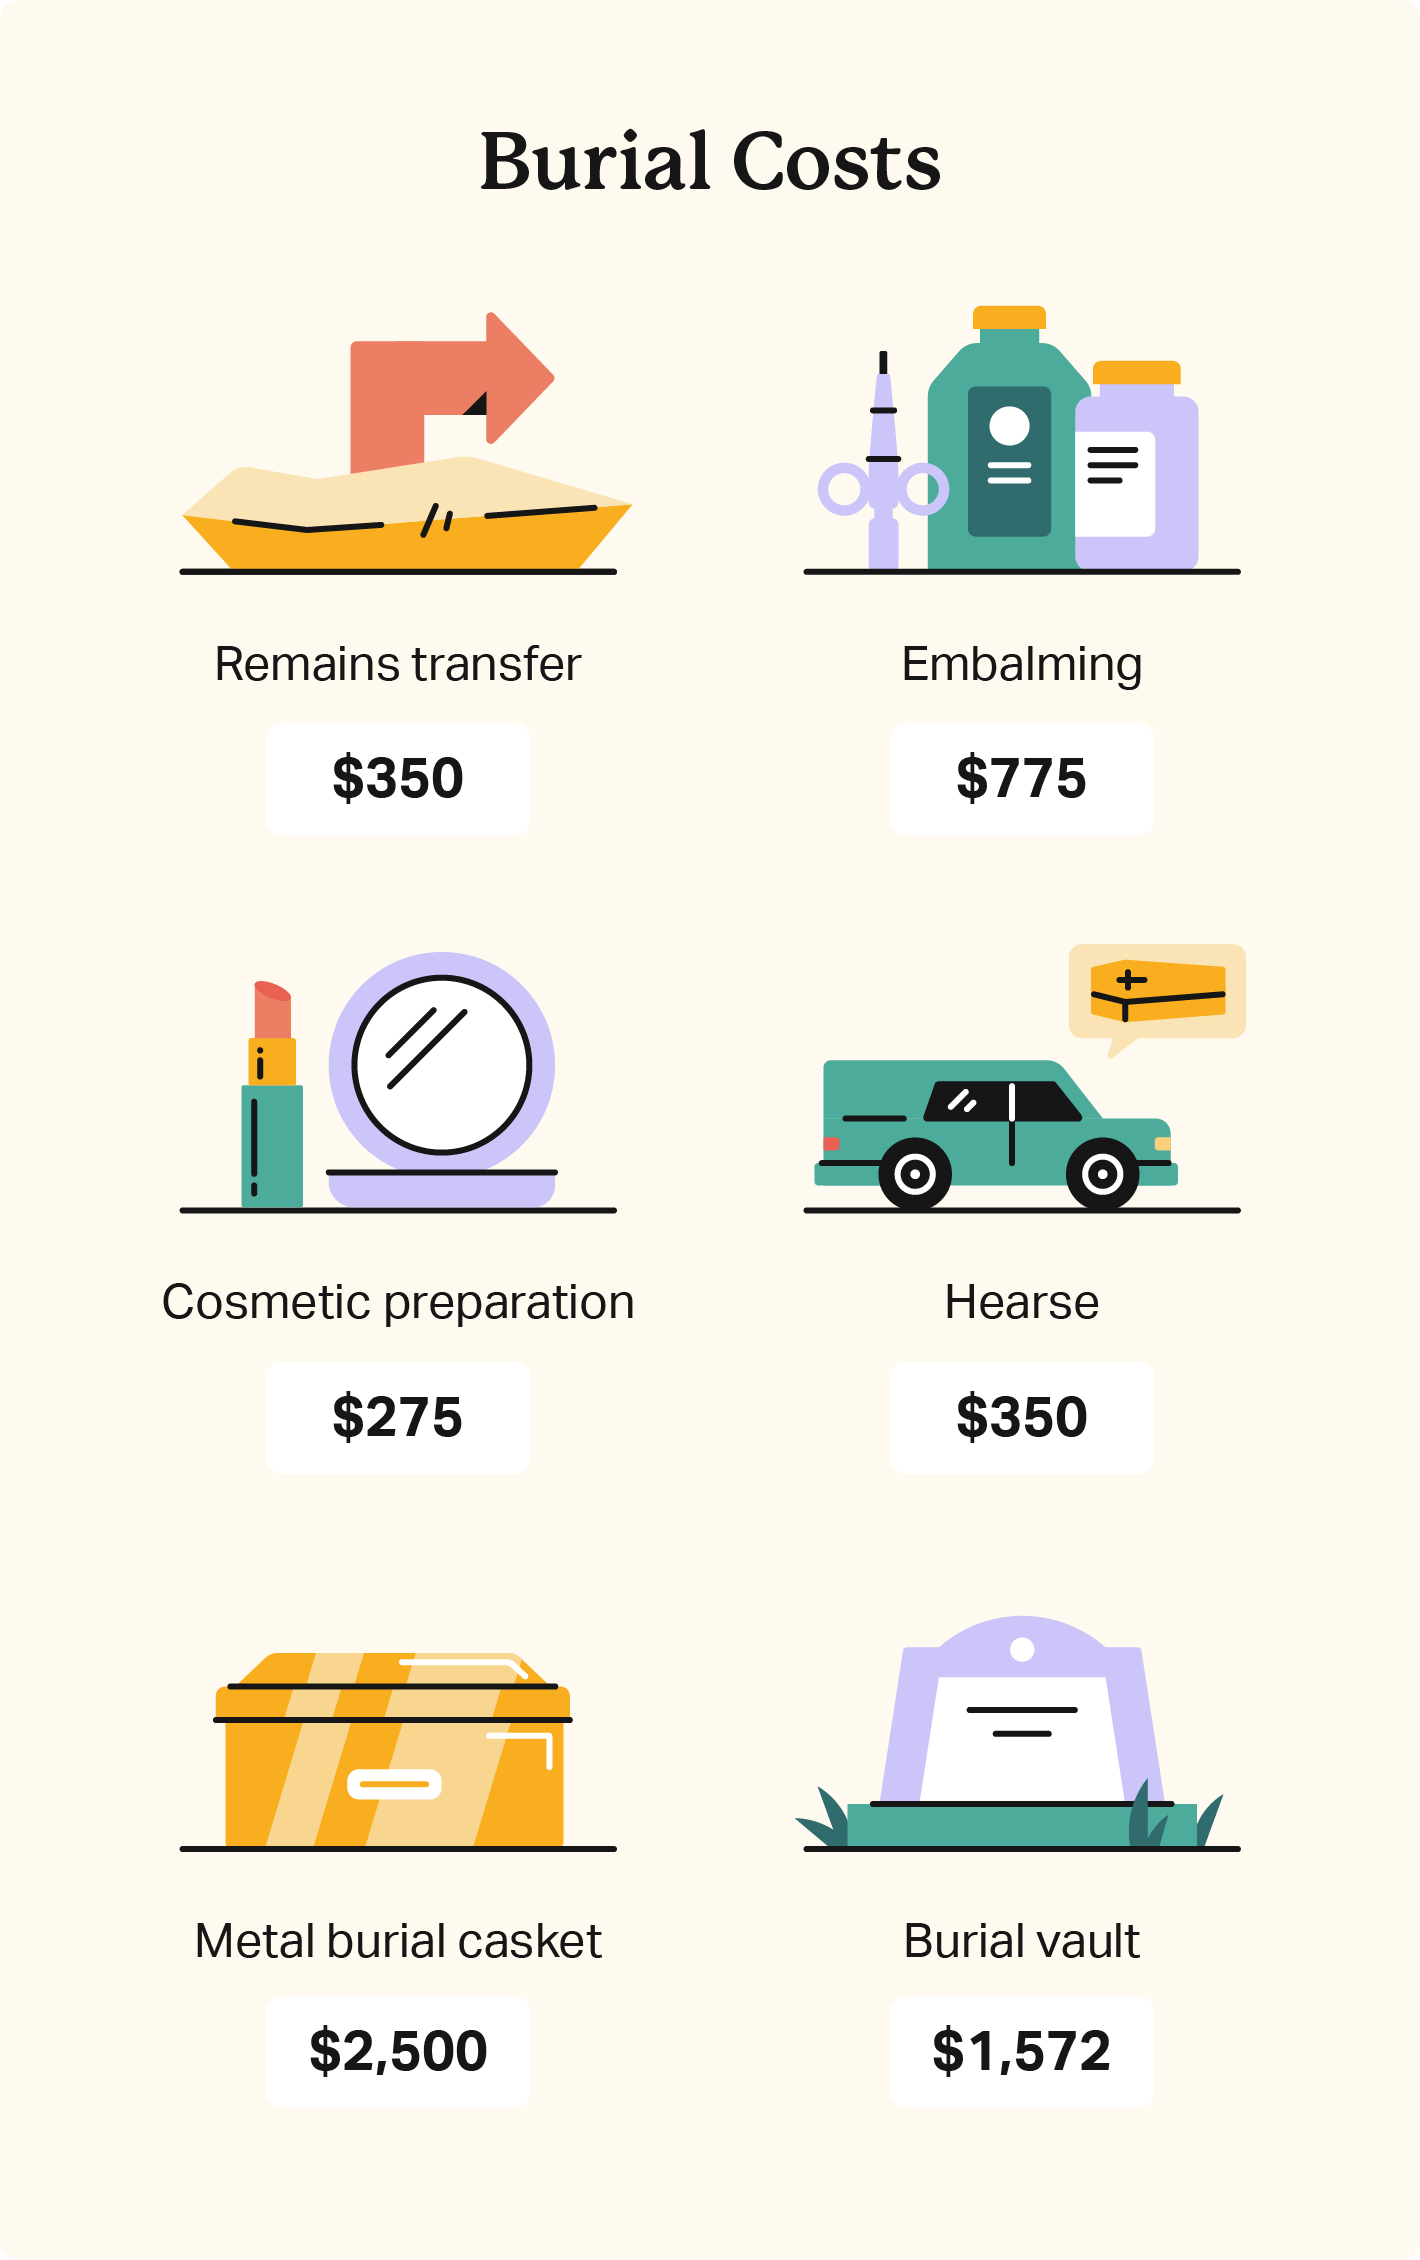 Illustrations compare burial costs, including remains transfer, embalming, cosmetics, casket, and burial vault. 